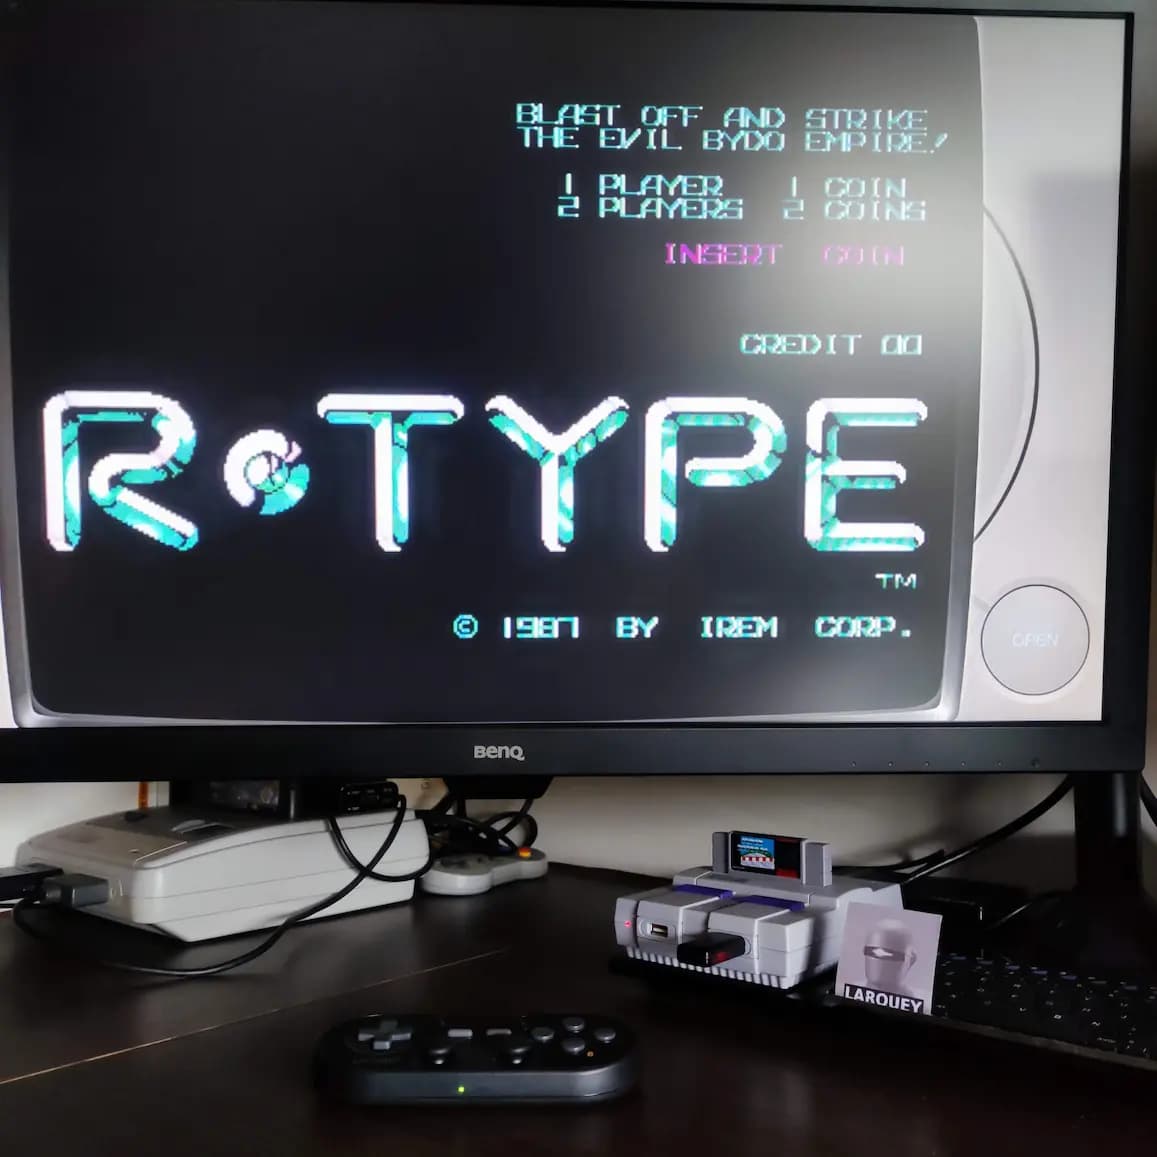 Larquey: R-Types: R-Type [3 Lives/Hard] (Playstation 1 Emulated) 61,800 points on 2022-09-04 06:15:36